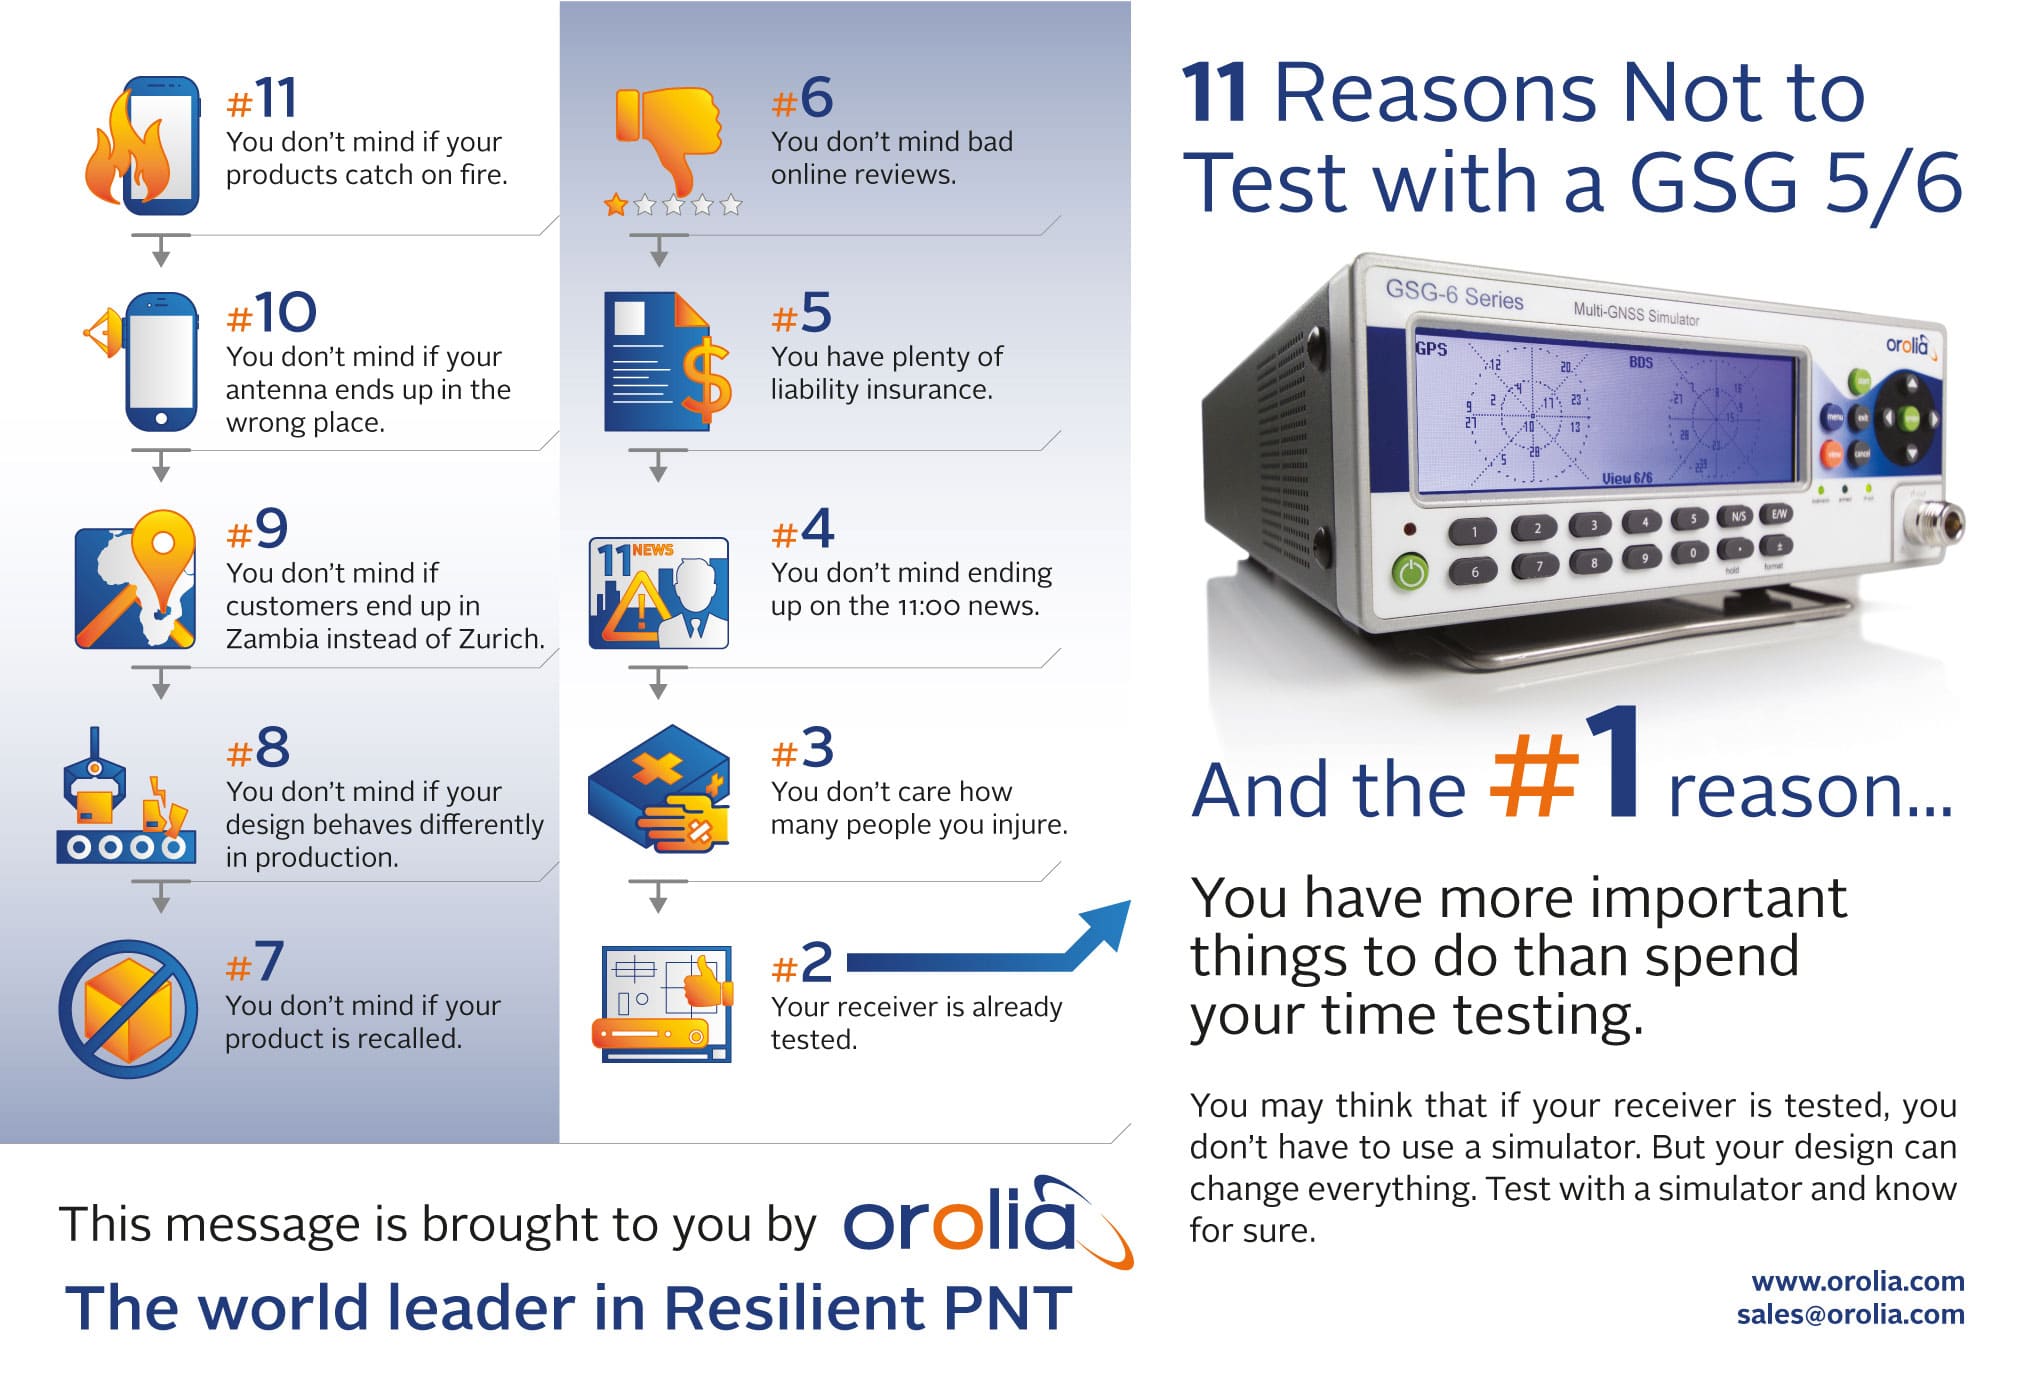 11-Reasons-Not-to-Test-with-a-GSG-56-v10-6.75-x-4.625-web.jpg